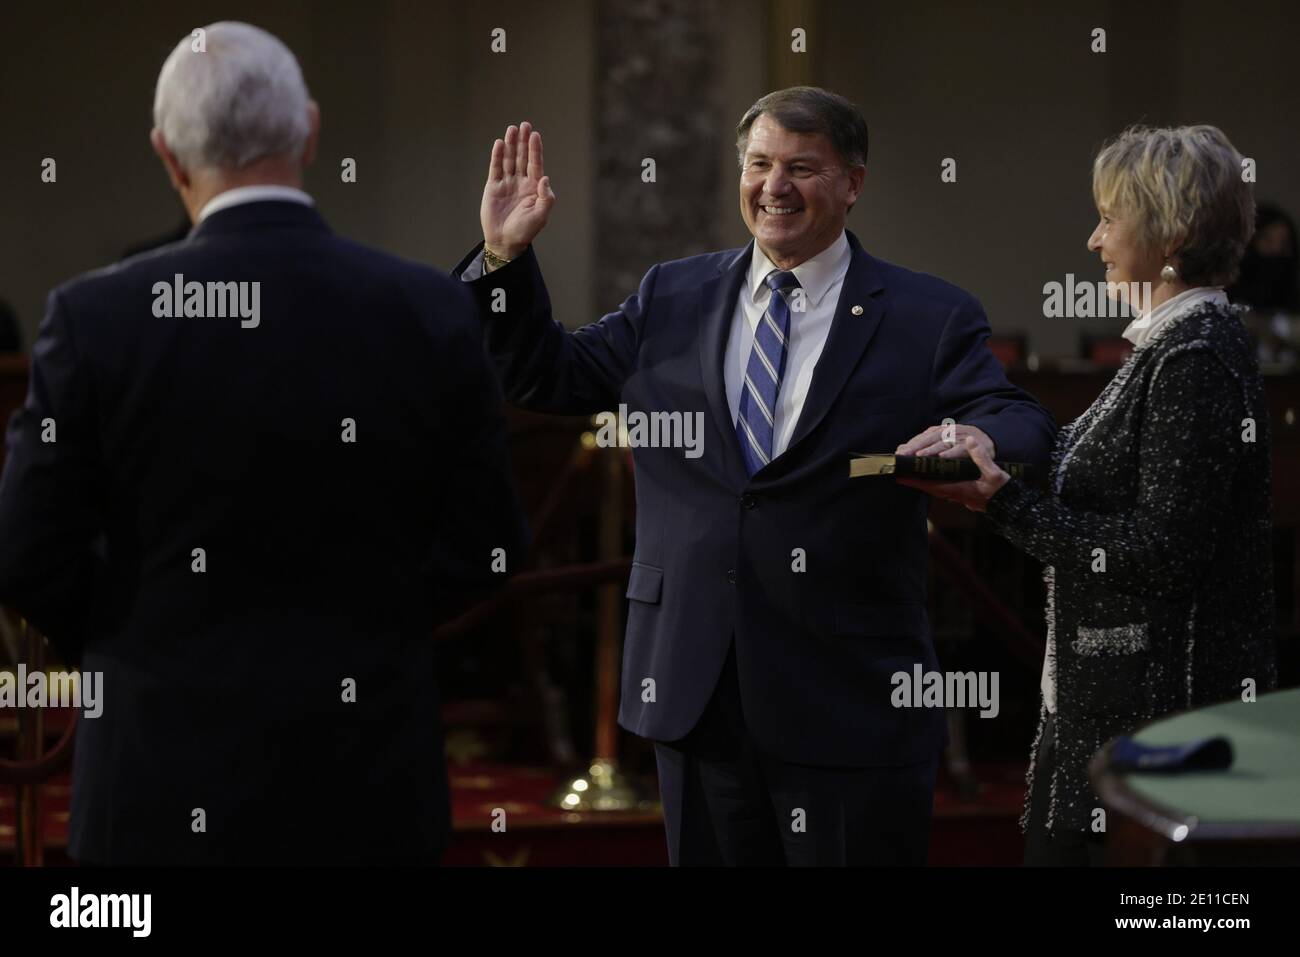 Washington, United States. 03rd Jan, 2021. Senator Mike Rounds, a Republican from South Dakota, center, smiles while being ceremoniously sworn-in by U.S. Vice President Mike Pence, left, at the U.S. Capitol in Washington, DC on Sunday, January 3, 2021. The 117th Congress begins today with the election of the speaker of the House and administration of the oath of office for lawmakers in both chambers, procedures that will be modified to account for Covid-19 precautions. Pool photo Samuel Corum/UPI Credit: UPI/Alamy Live News Stock Photo